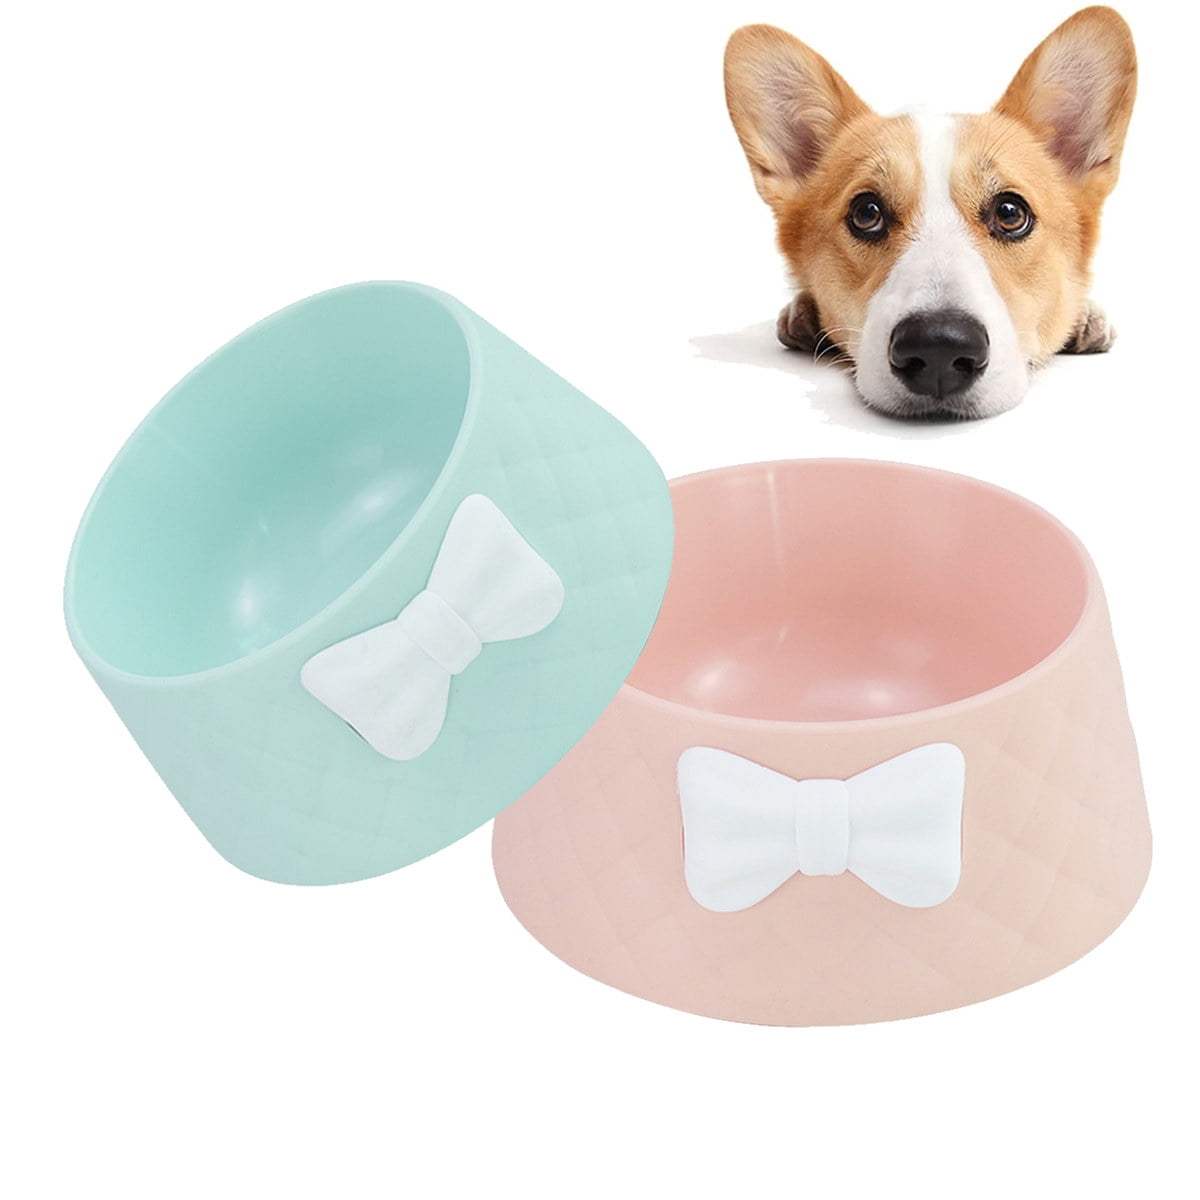 Dog bowls - ZOE: Flowers - Bowls for Dogs and Cats - Pets and Bowls